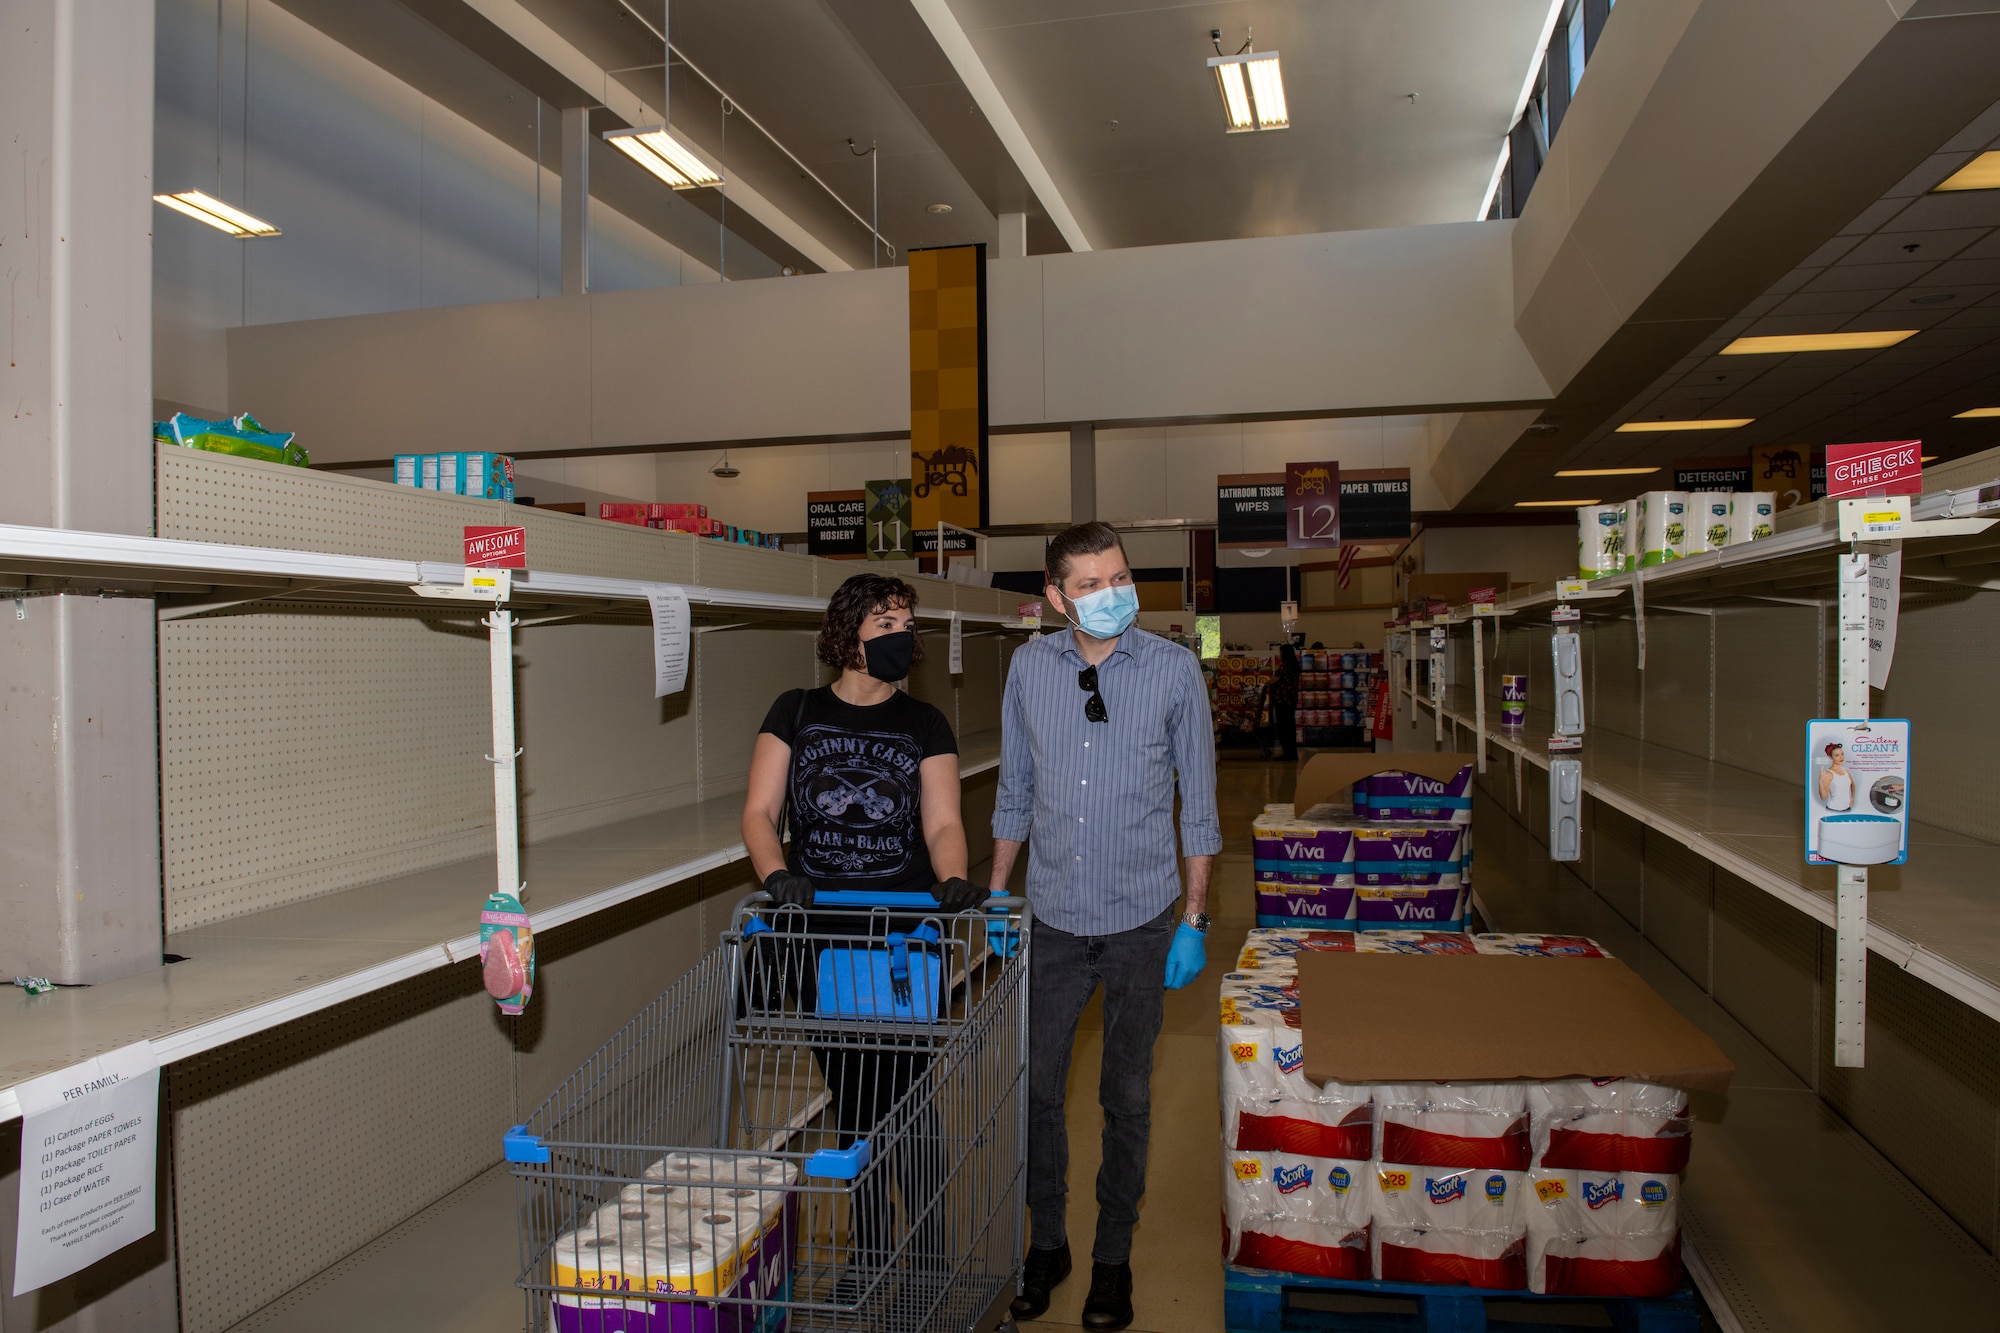 U.S. Air Force Senior Airman Nichole Krinberg, left, 60th Aerial Port Squadron air transportation journeyman, shops for paper towels with her husband, John Christ,  April 16, 2020, inside the commissary at Travis Air Force Base, California. Since the coronavirus pandemic, household goods such as toilet paper and paper towels have become increasingly scarce. (U.S. Air Force photo by Tech. Sgt. James Hodgman)